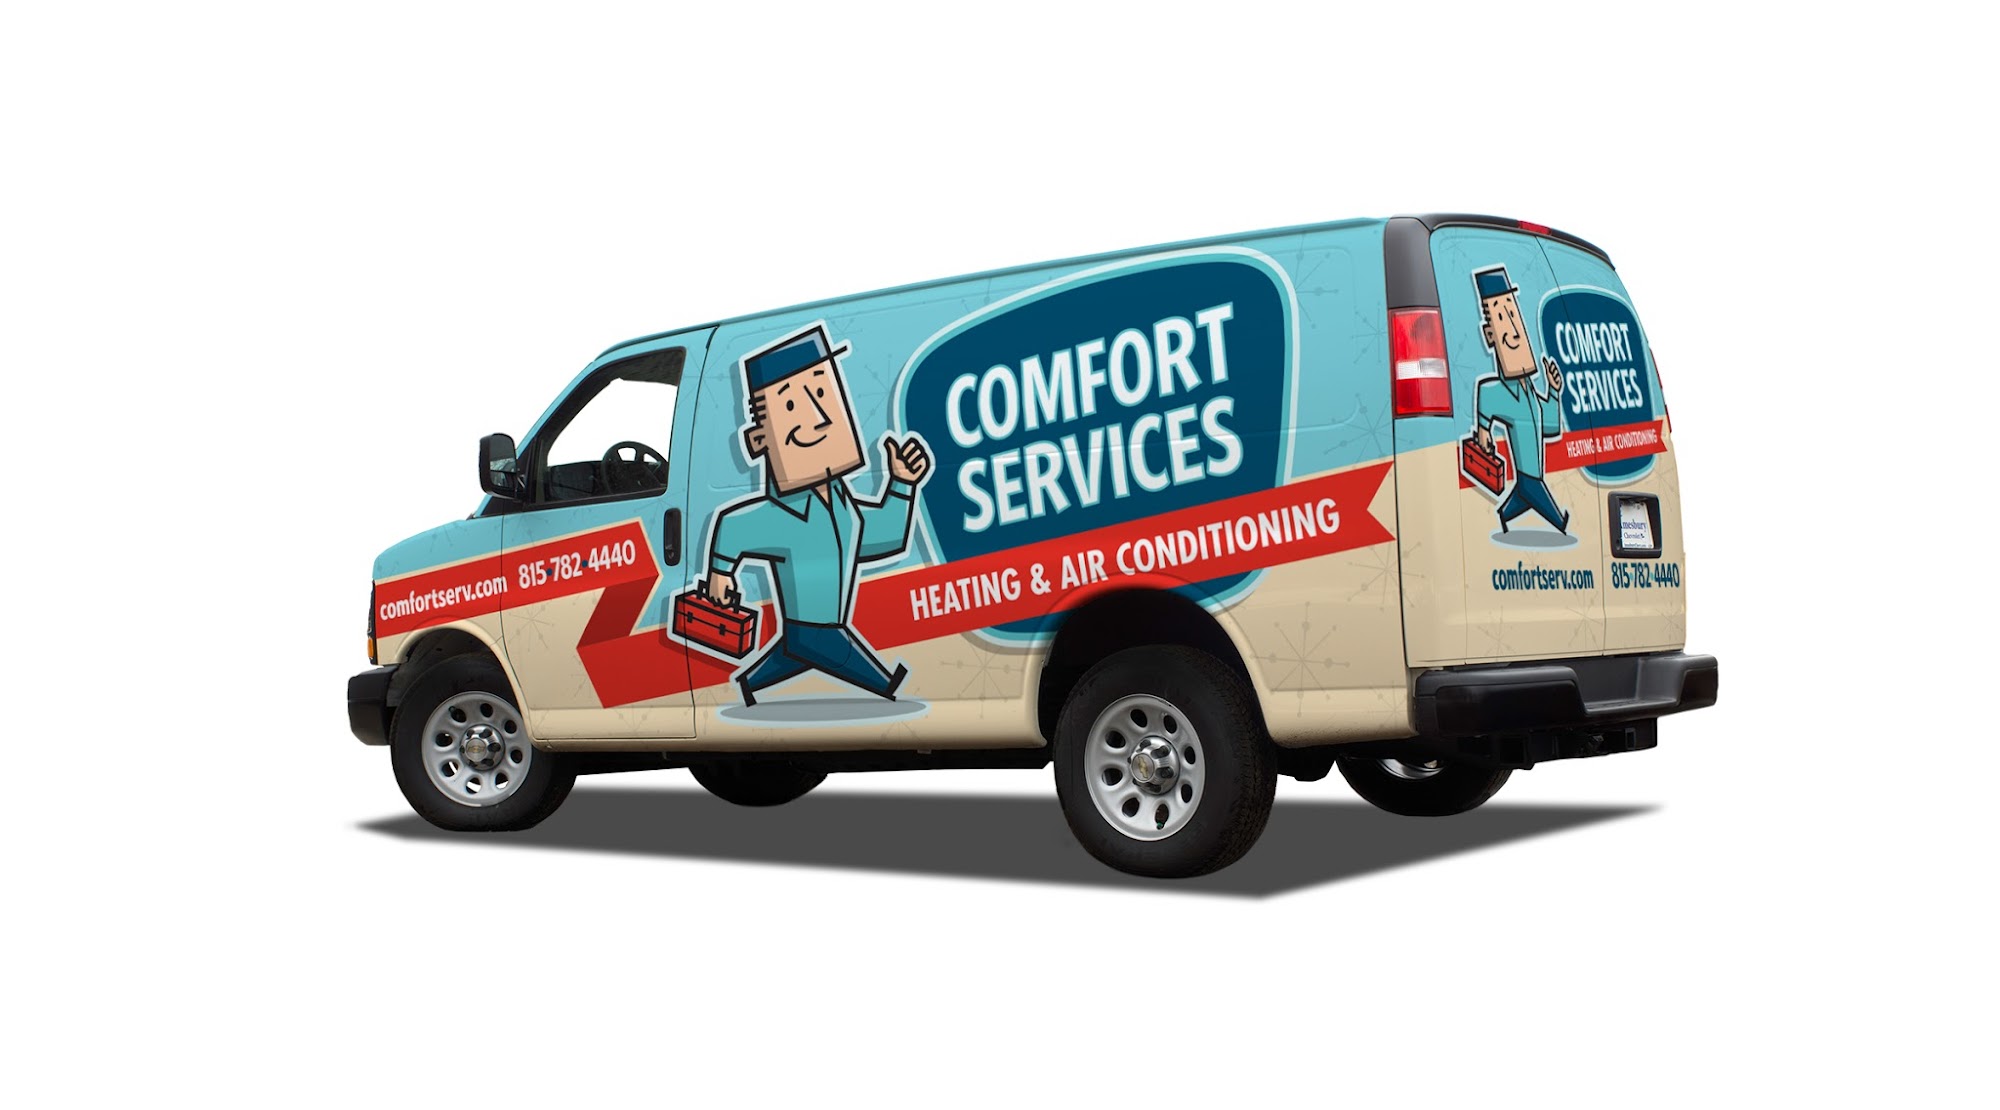 Comfort Services Heating & Air Conditioning, Inc.